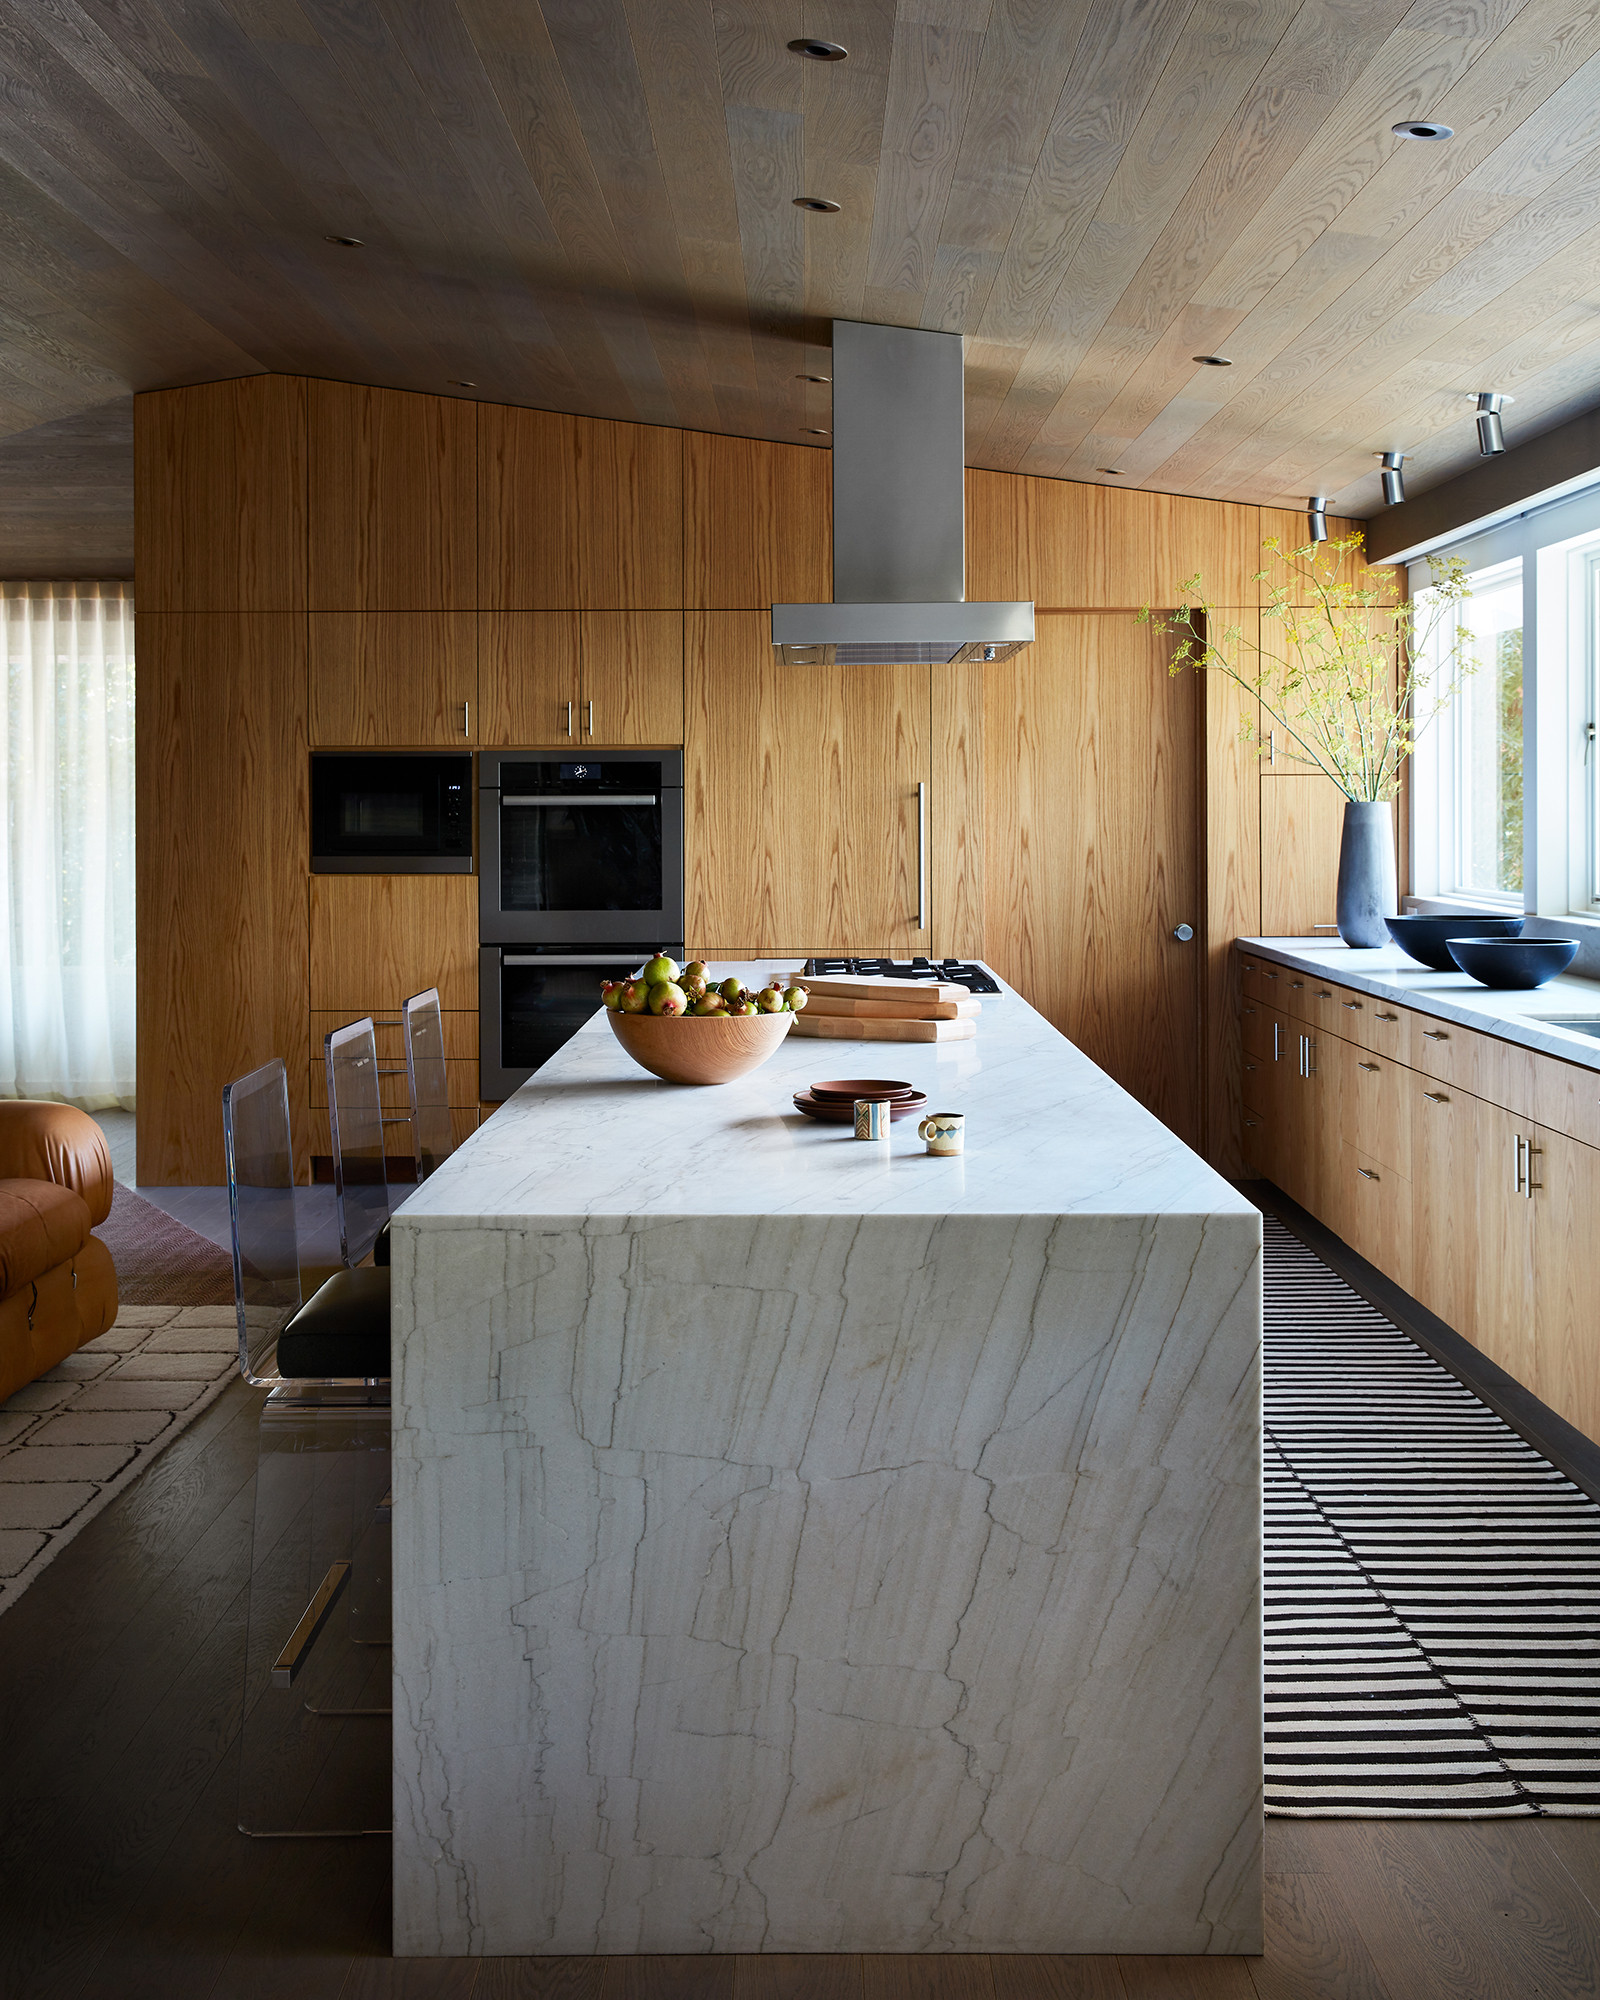 18 Wood Ceiling Kitchen Ideas You'll Love   September, 18   Houzz